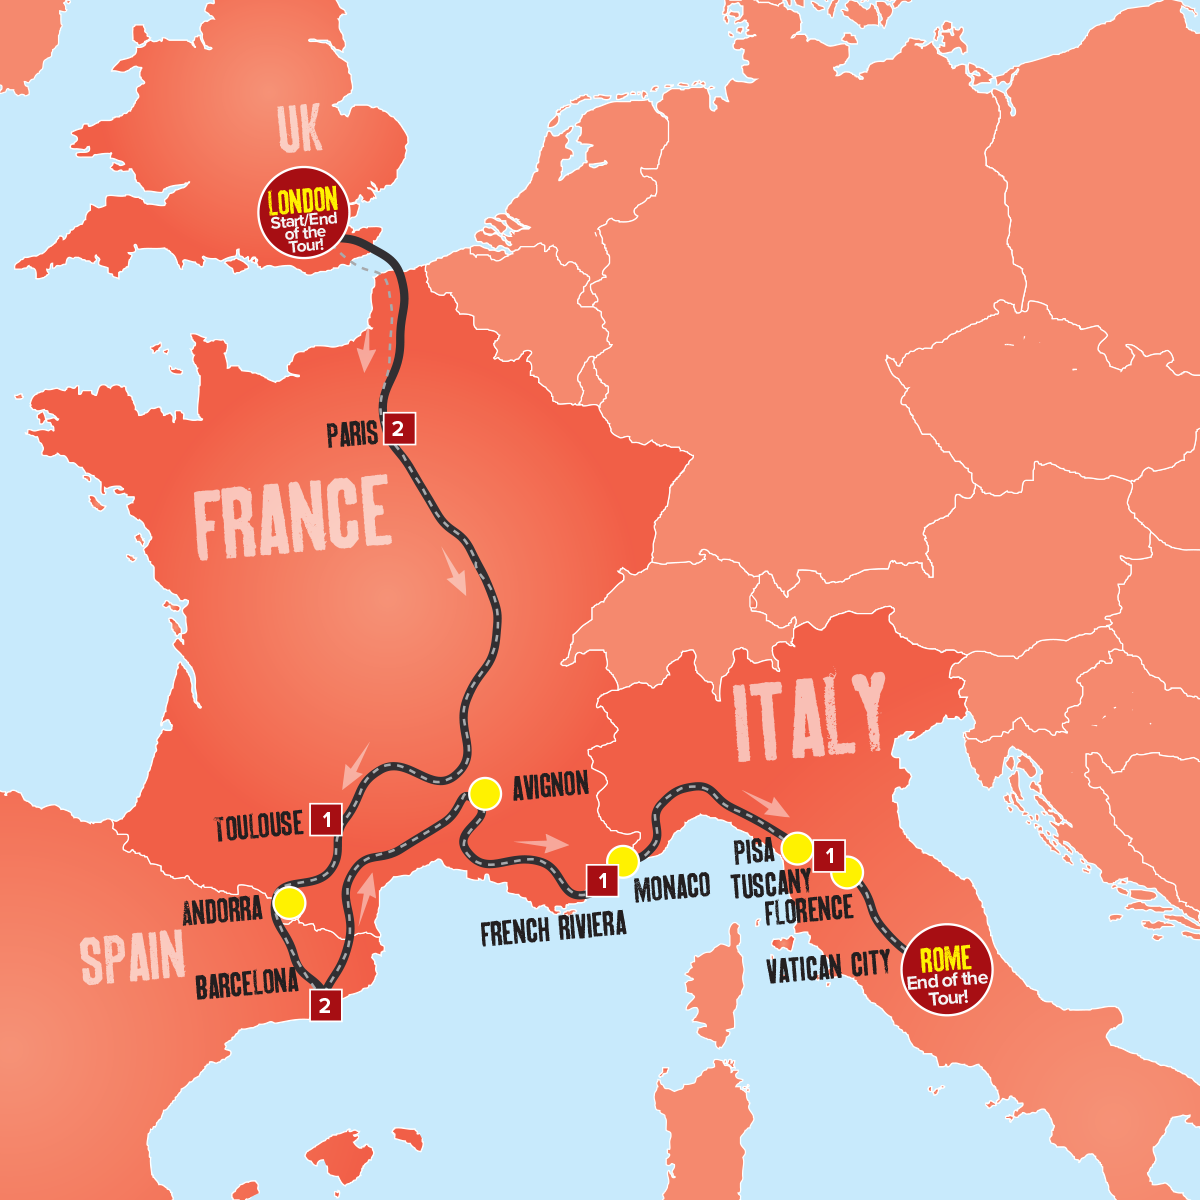 travel time from london to rome via train